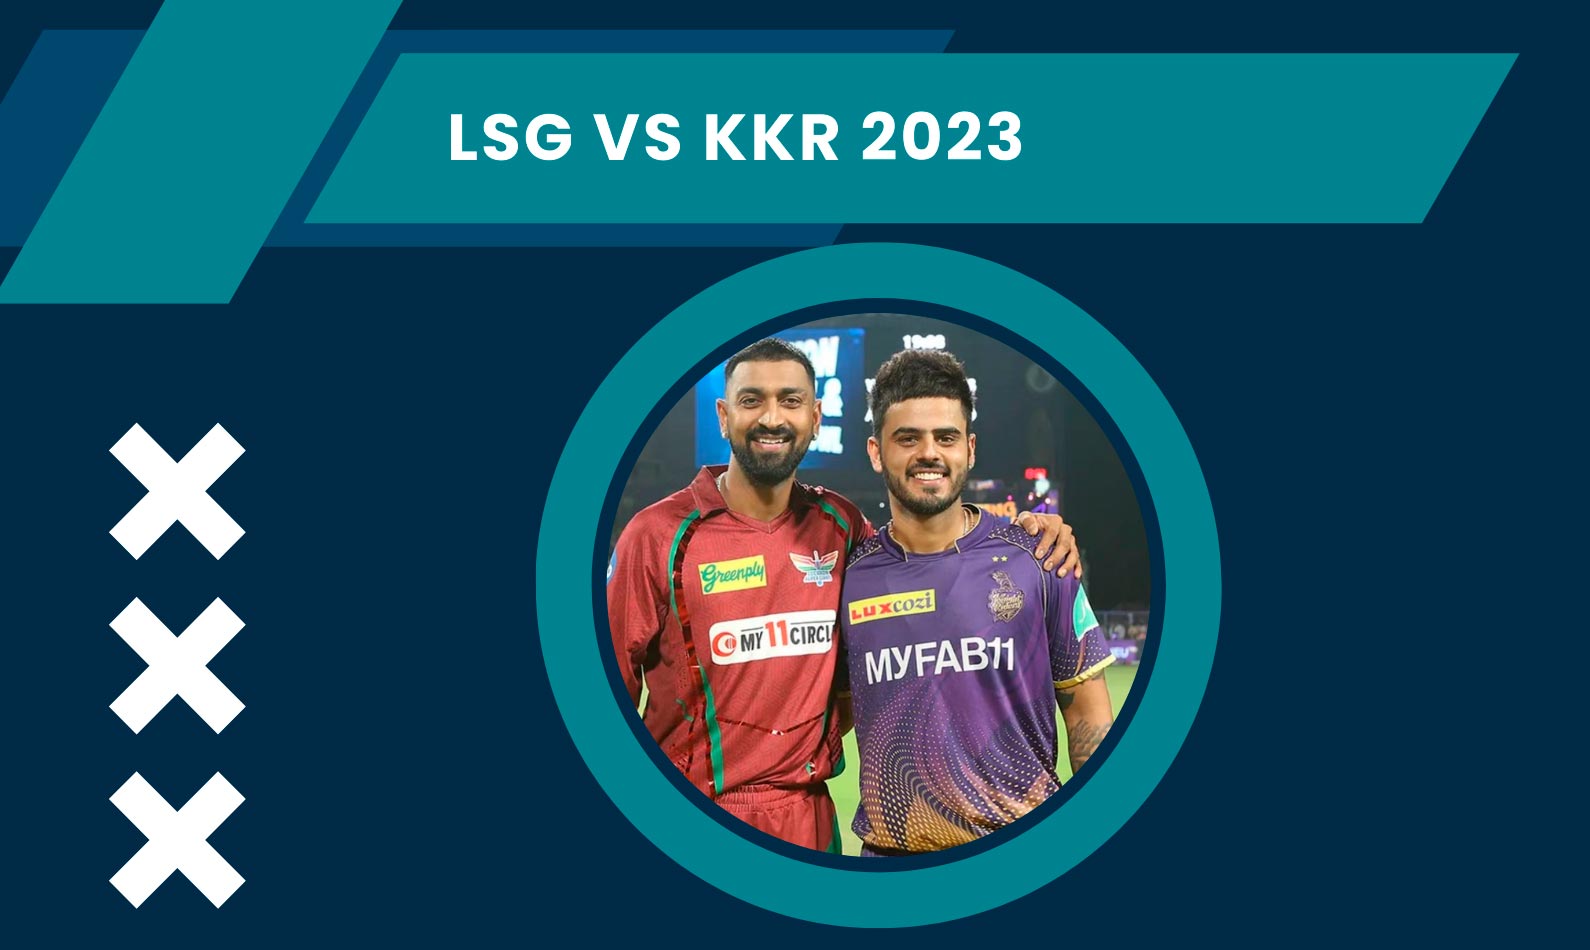 In an exciting encounter between Kolkata Knight Riders (KKR) and Lucknow Super Giants (LSG) in IPL 2023